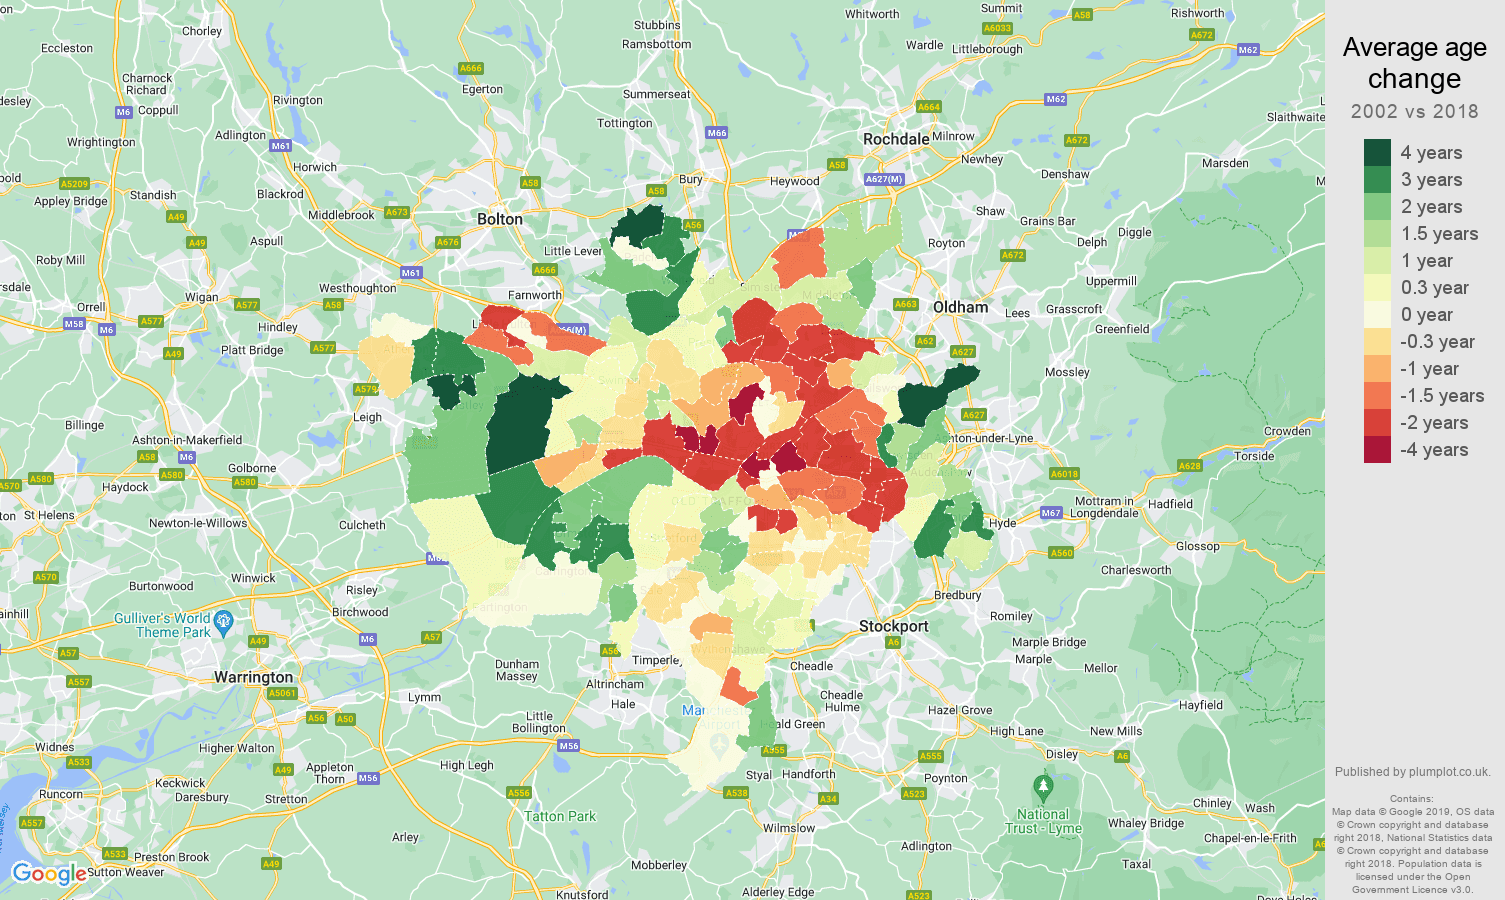 Manchester population growth rates.